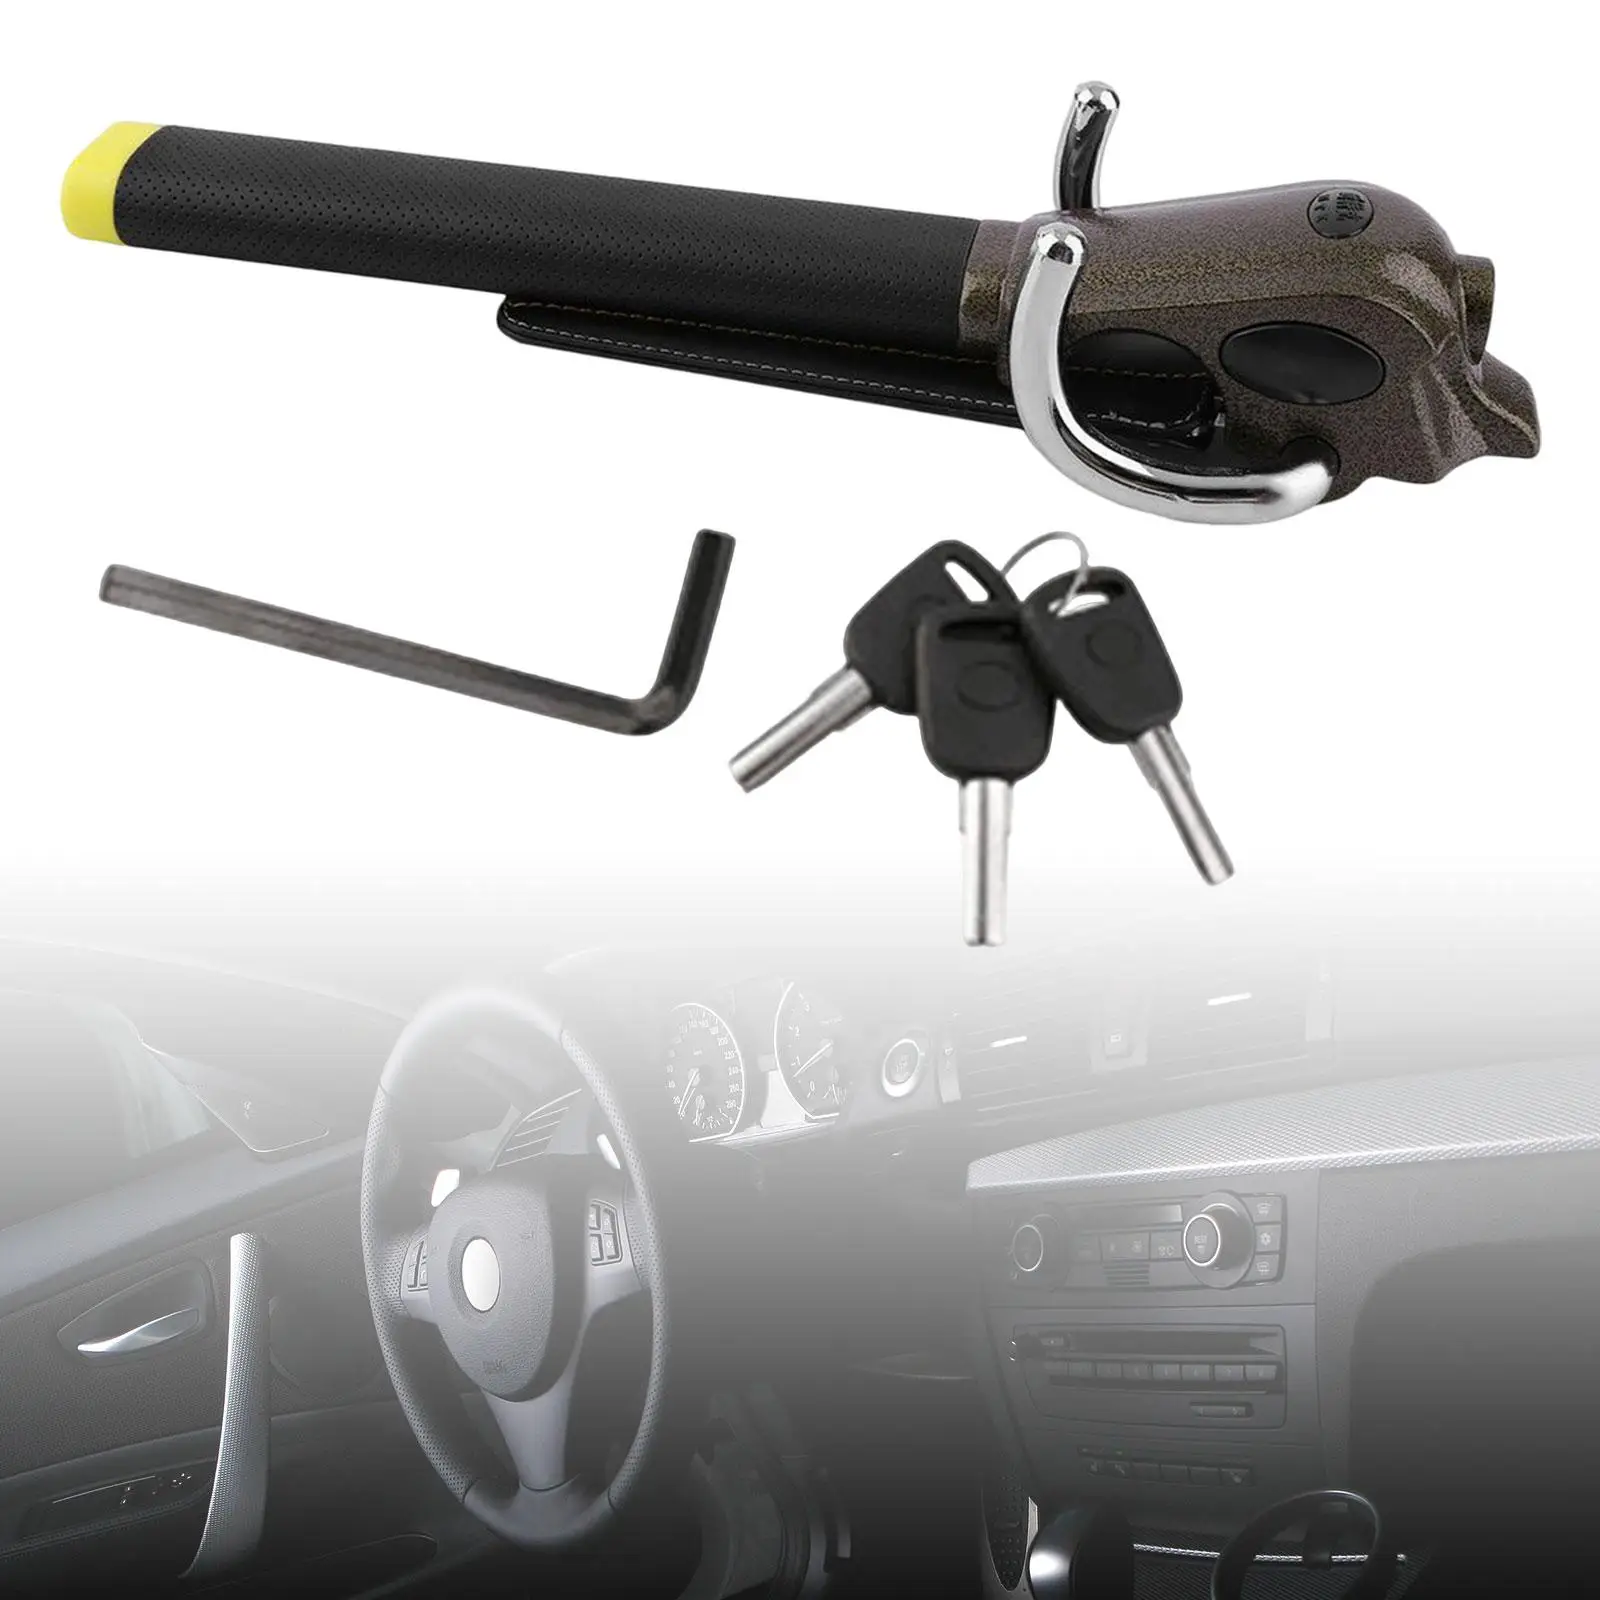 Steering Wheel Lock with 3x Keys Automotive Convenient Heavy Duty Vehicles Lock Accessories for SUV Truck Cars Van Vehicles